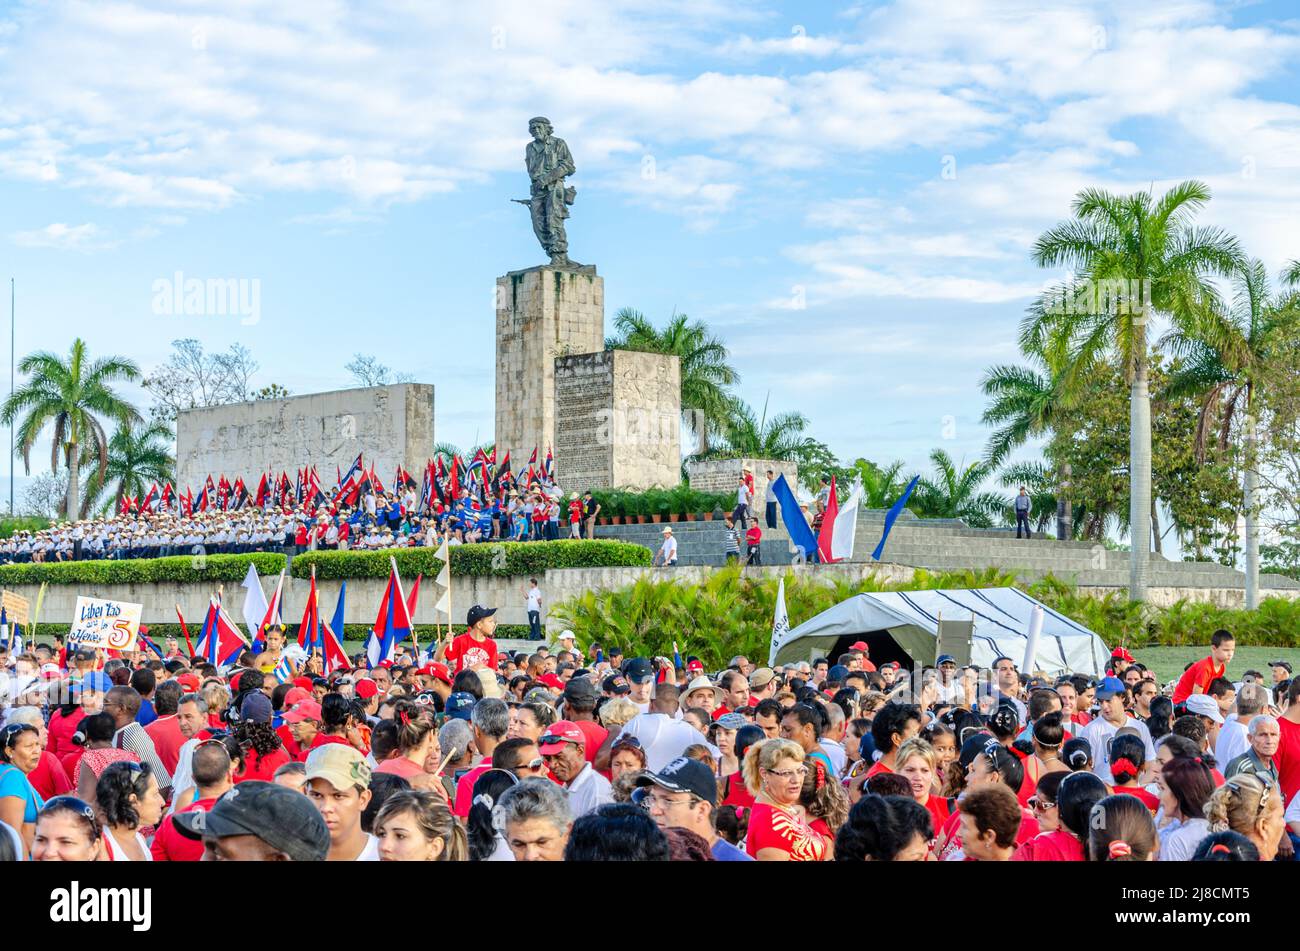 Large group of people parading. The traditional May Day or Workers Day celebrations are held annually in the Che Guevara Revolution Square and Memoria Stock Photo